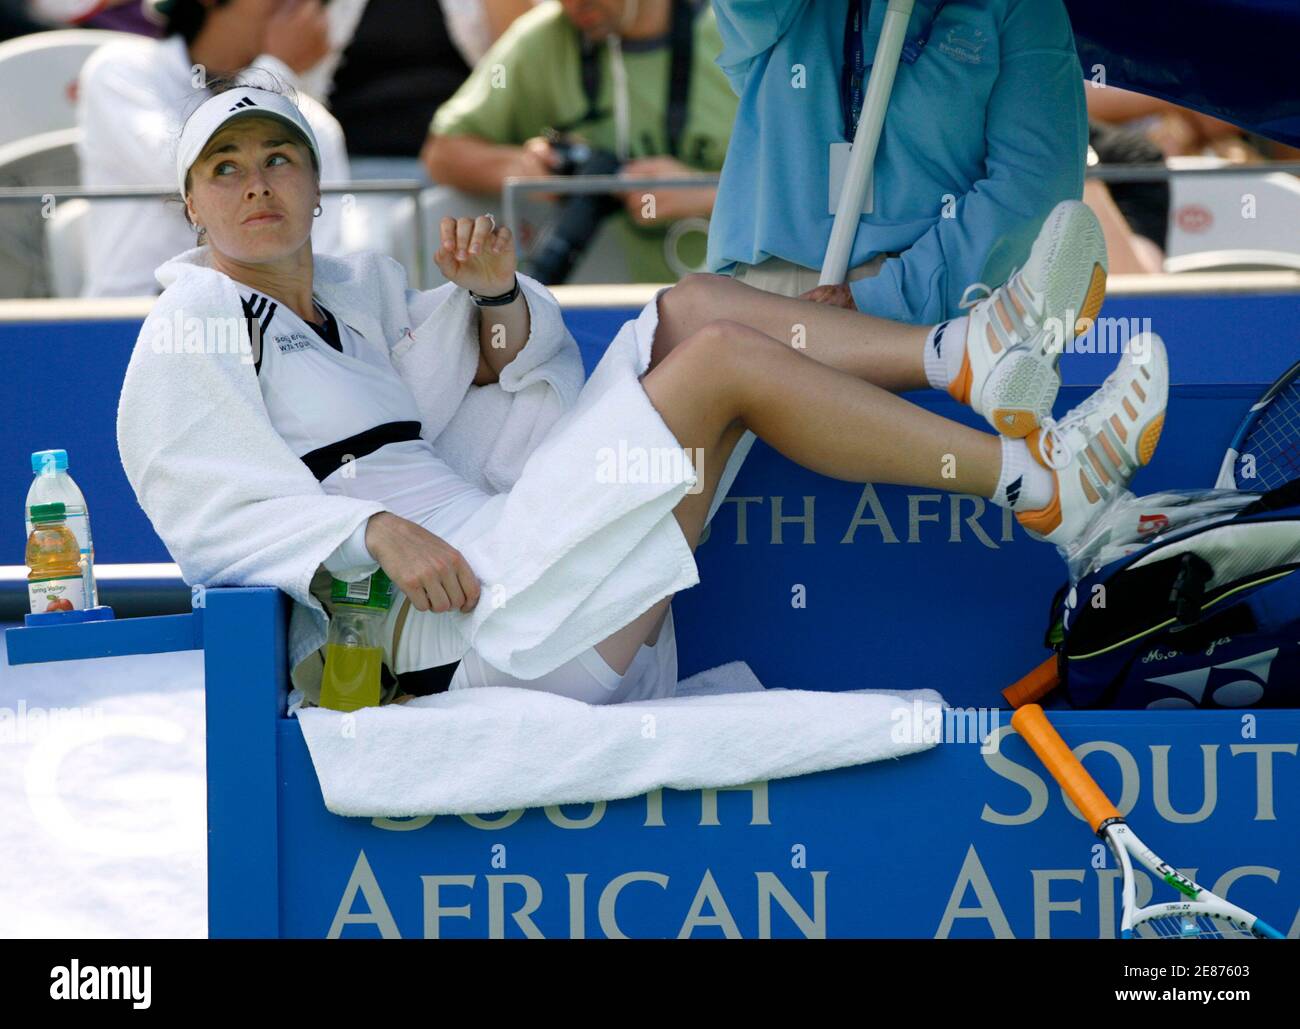 Martina Hingis of Switzerland lies on a seat while Jelena Jankovic (not  shown) of Serbia receives a medical time-out during their first round match  at the Sydney International Tennis Tournament at Olympic